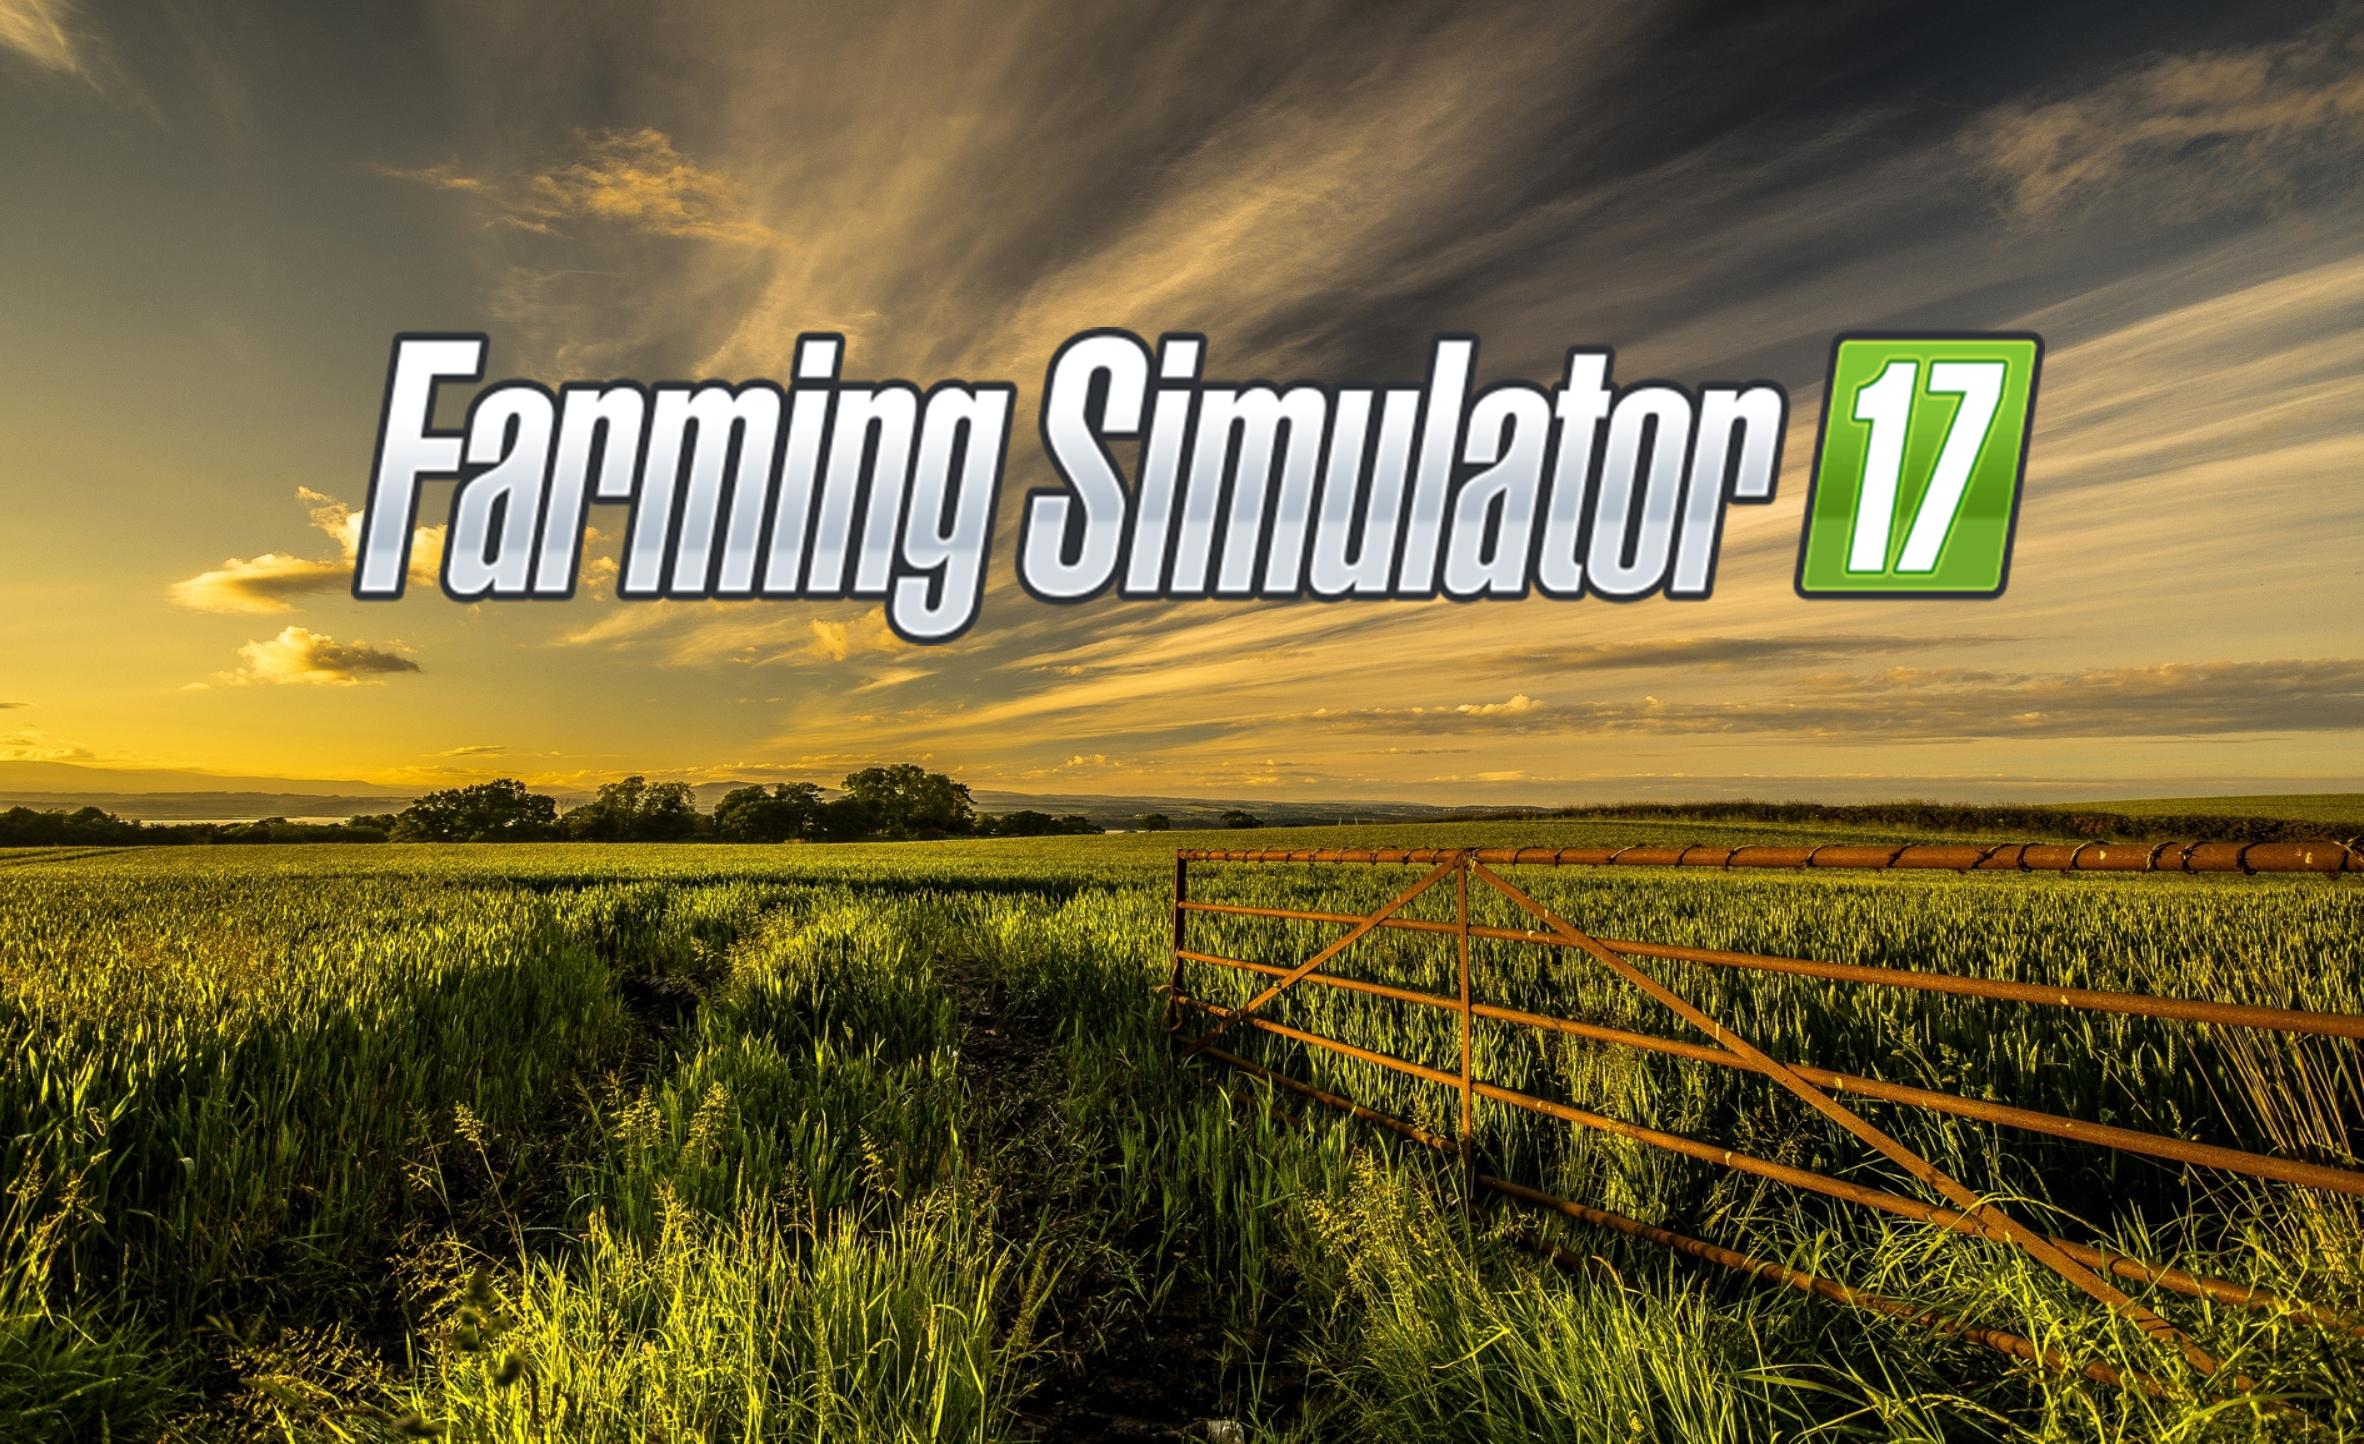 Agradecido Queja Seminario FS17 Compatible with PC, PS4 and Xbox One - Modhub.us